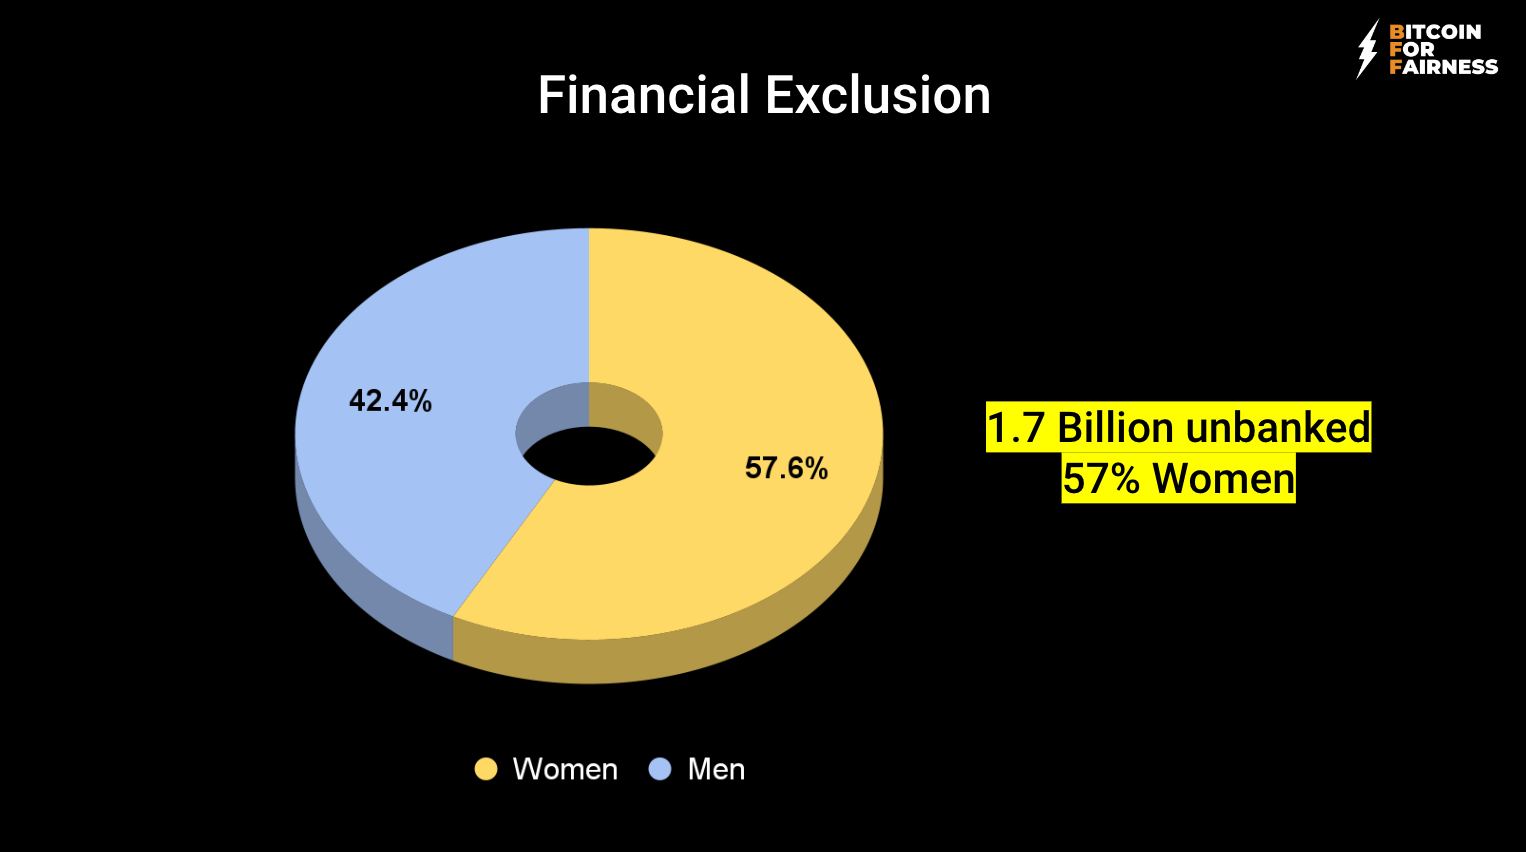 57% of all unbanked are women